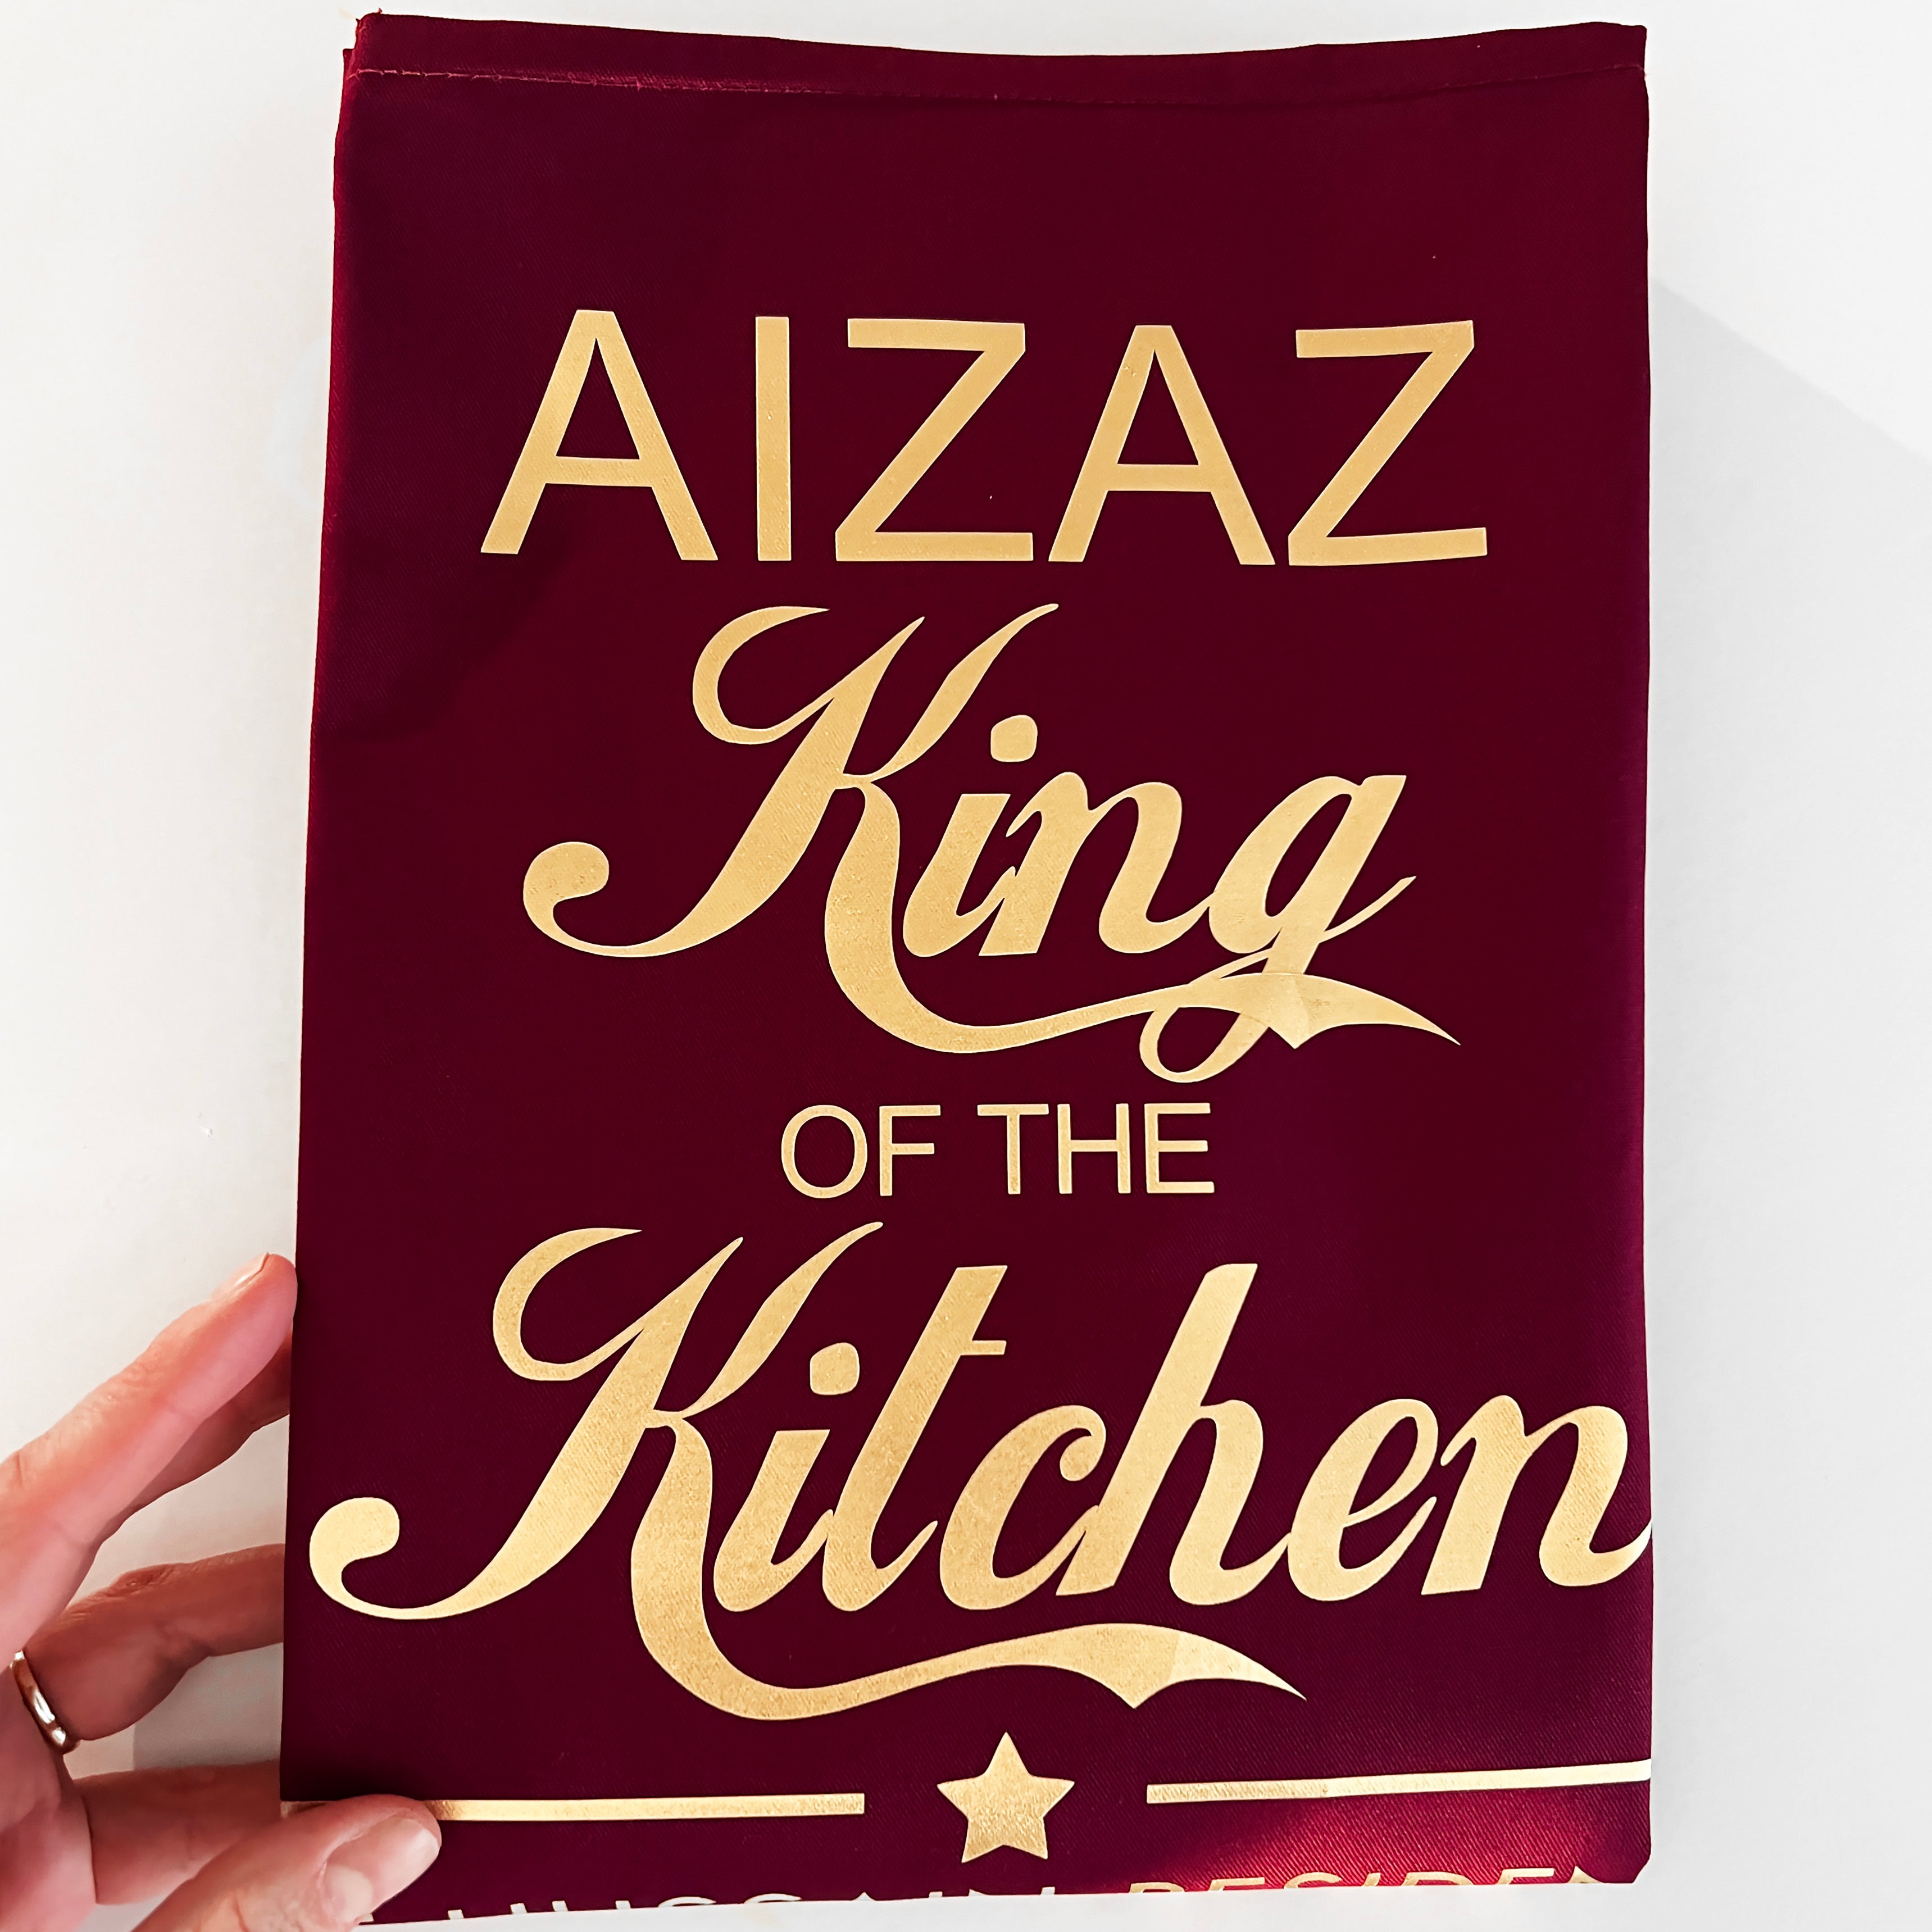 Personalised King Of The Kitchen Apron